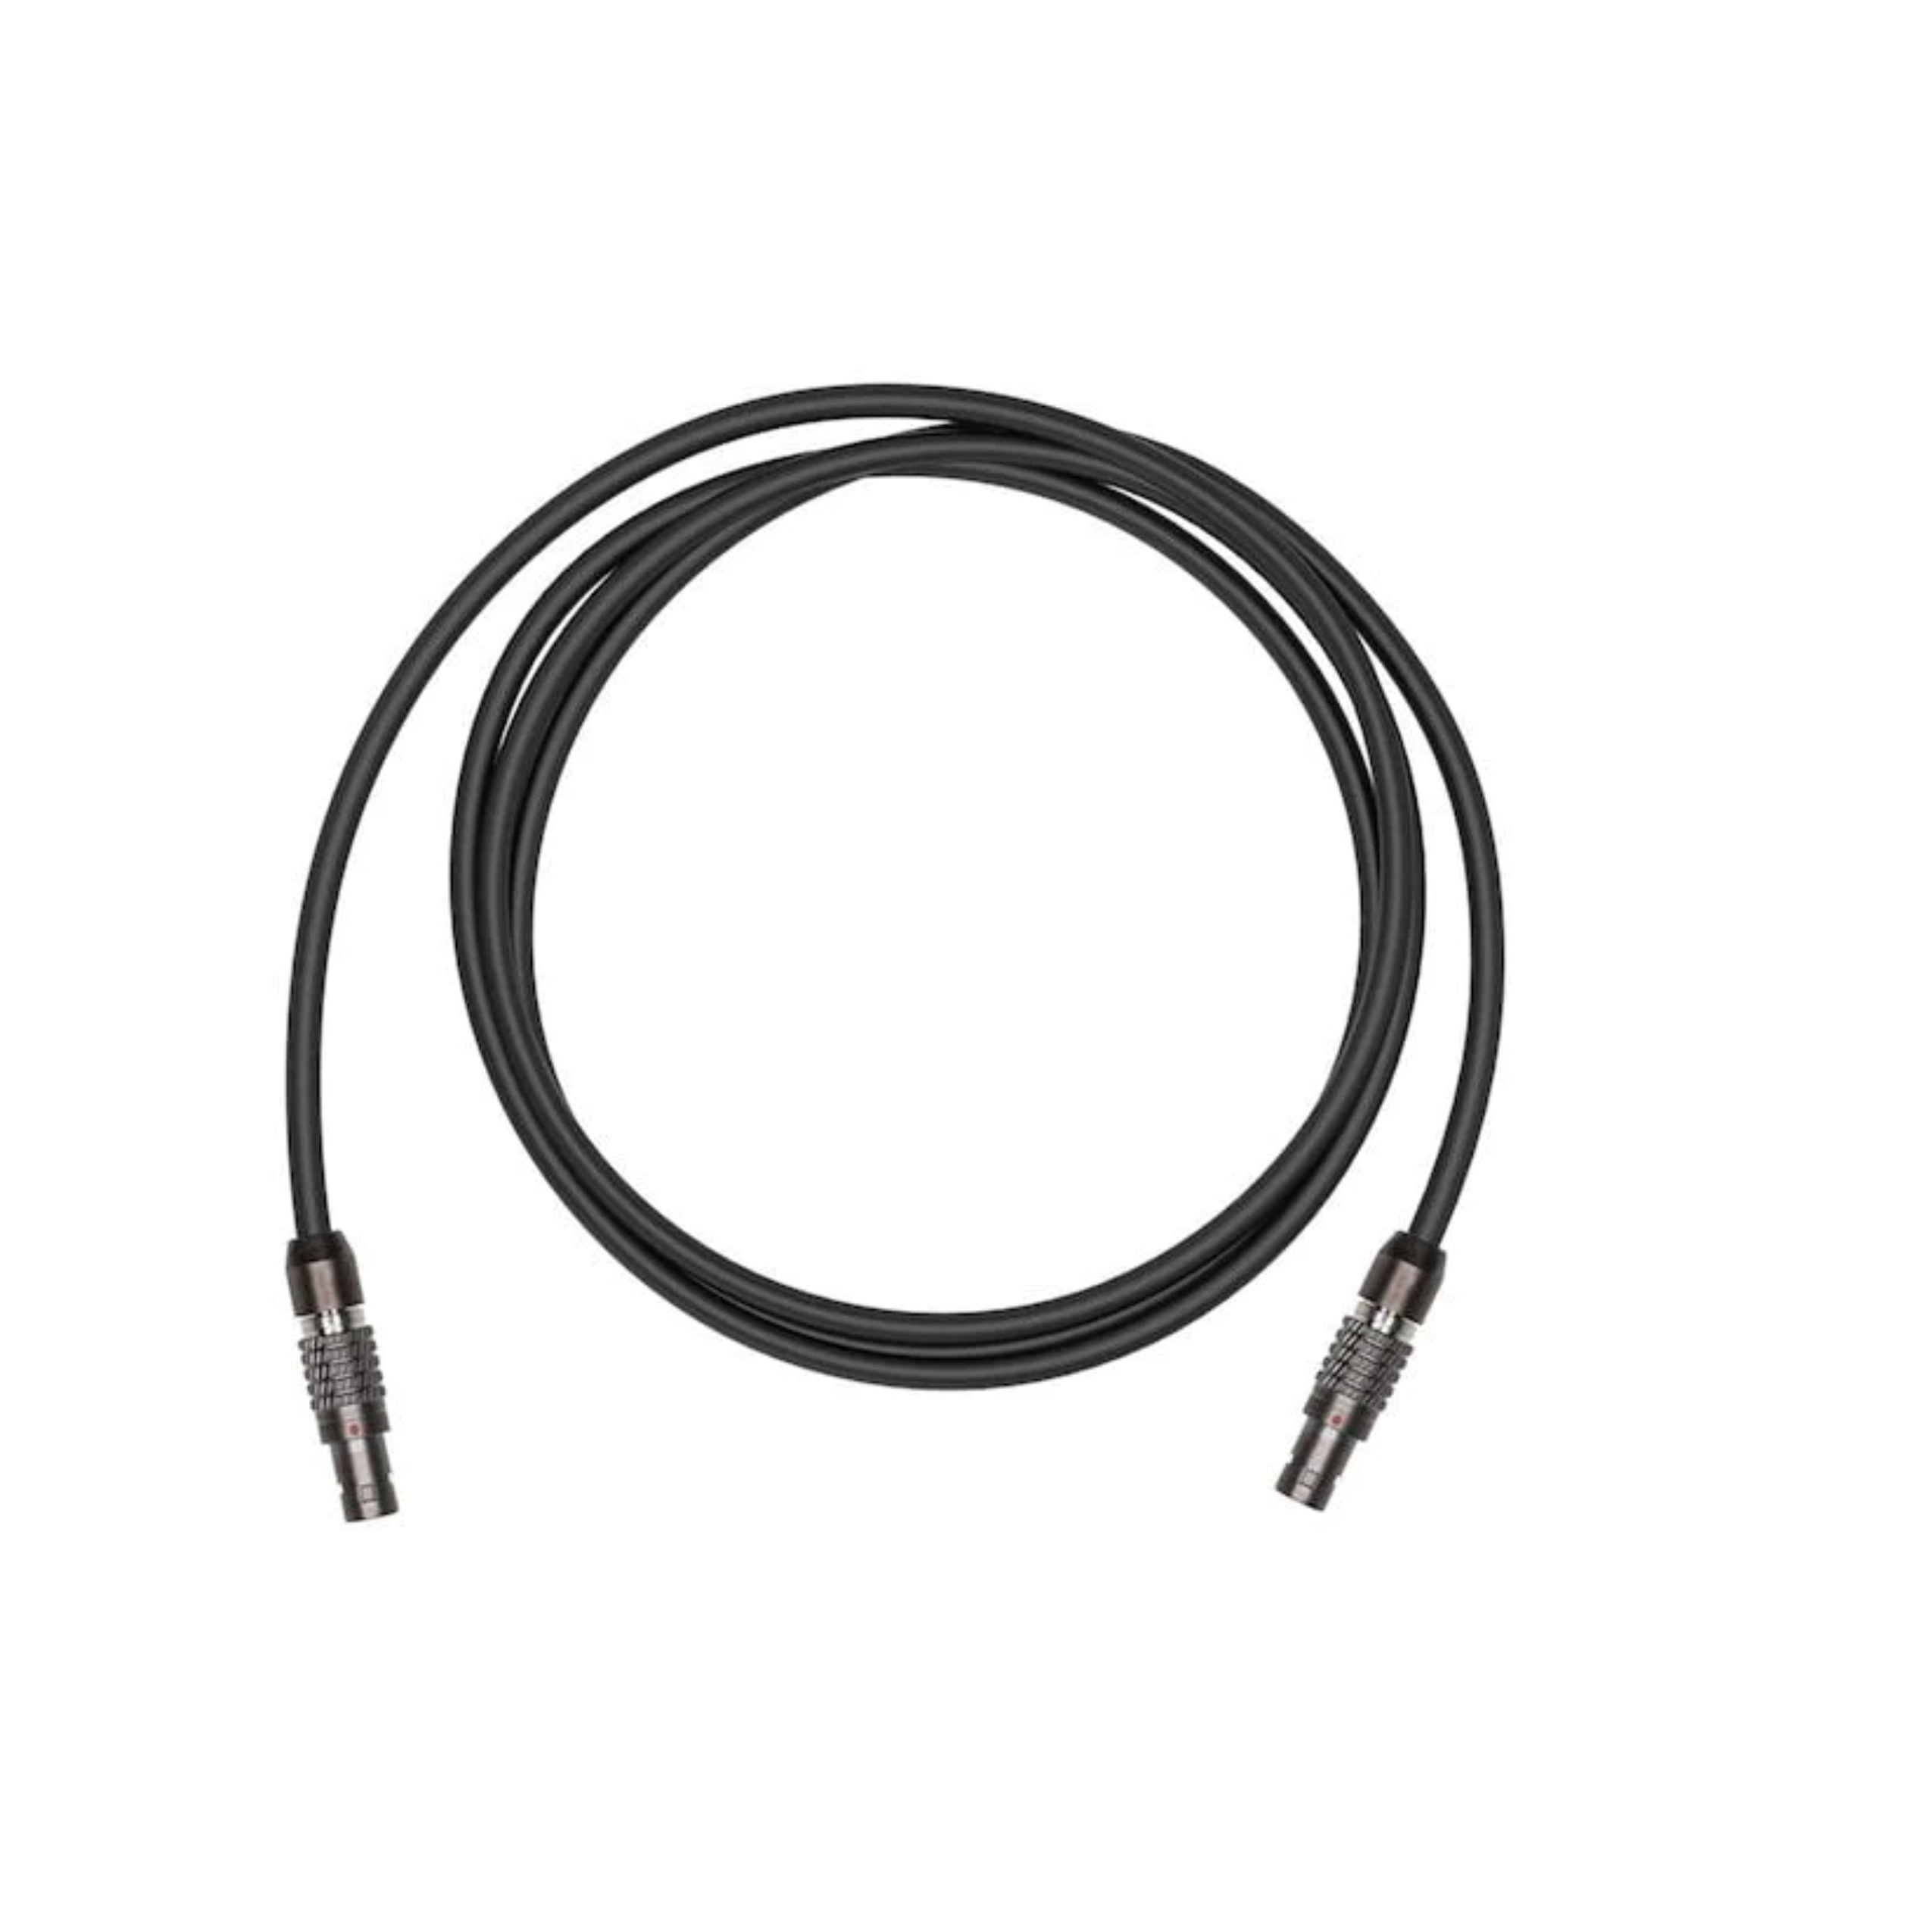 RONIN 2 POWER CABLE (2M) - DroneDynamics.ca